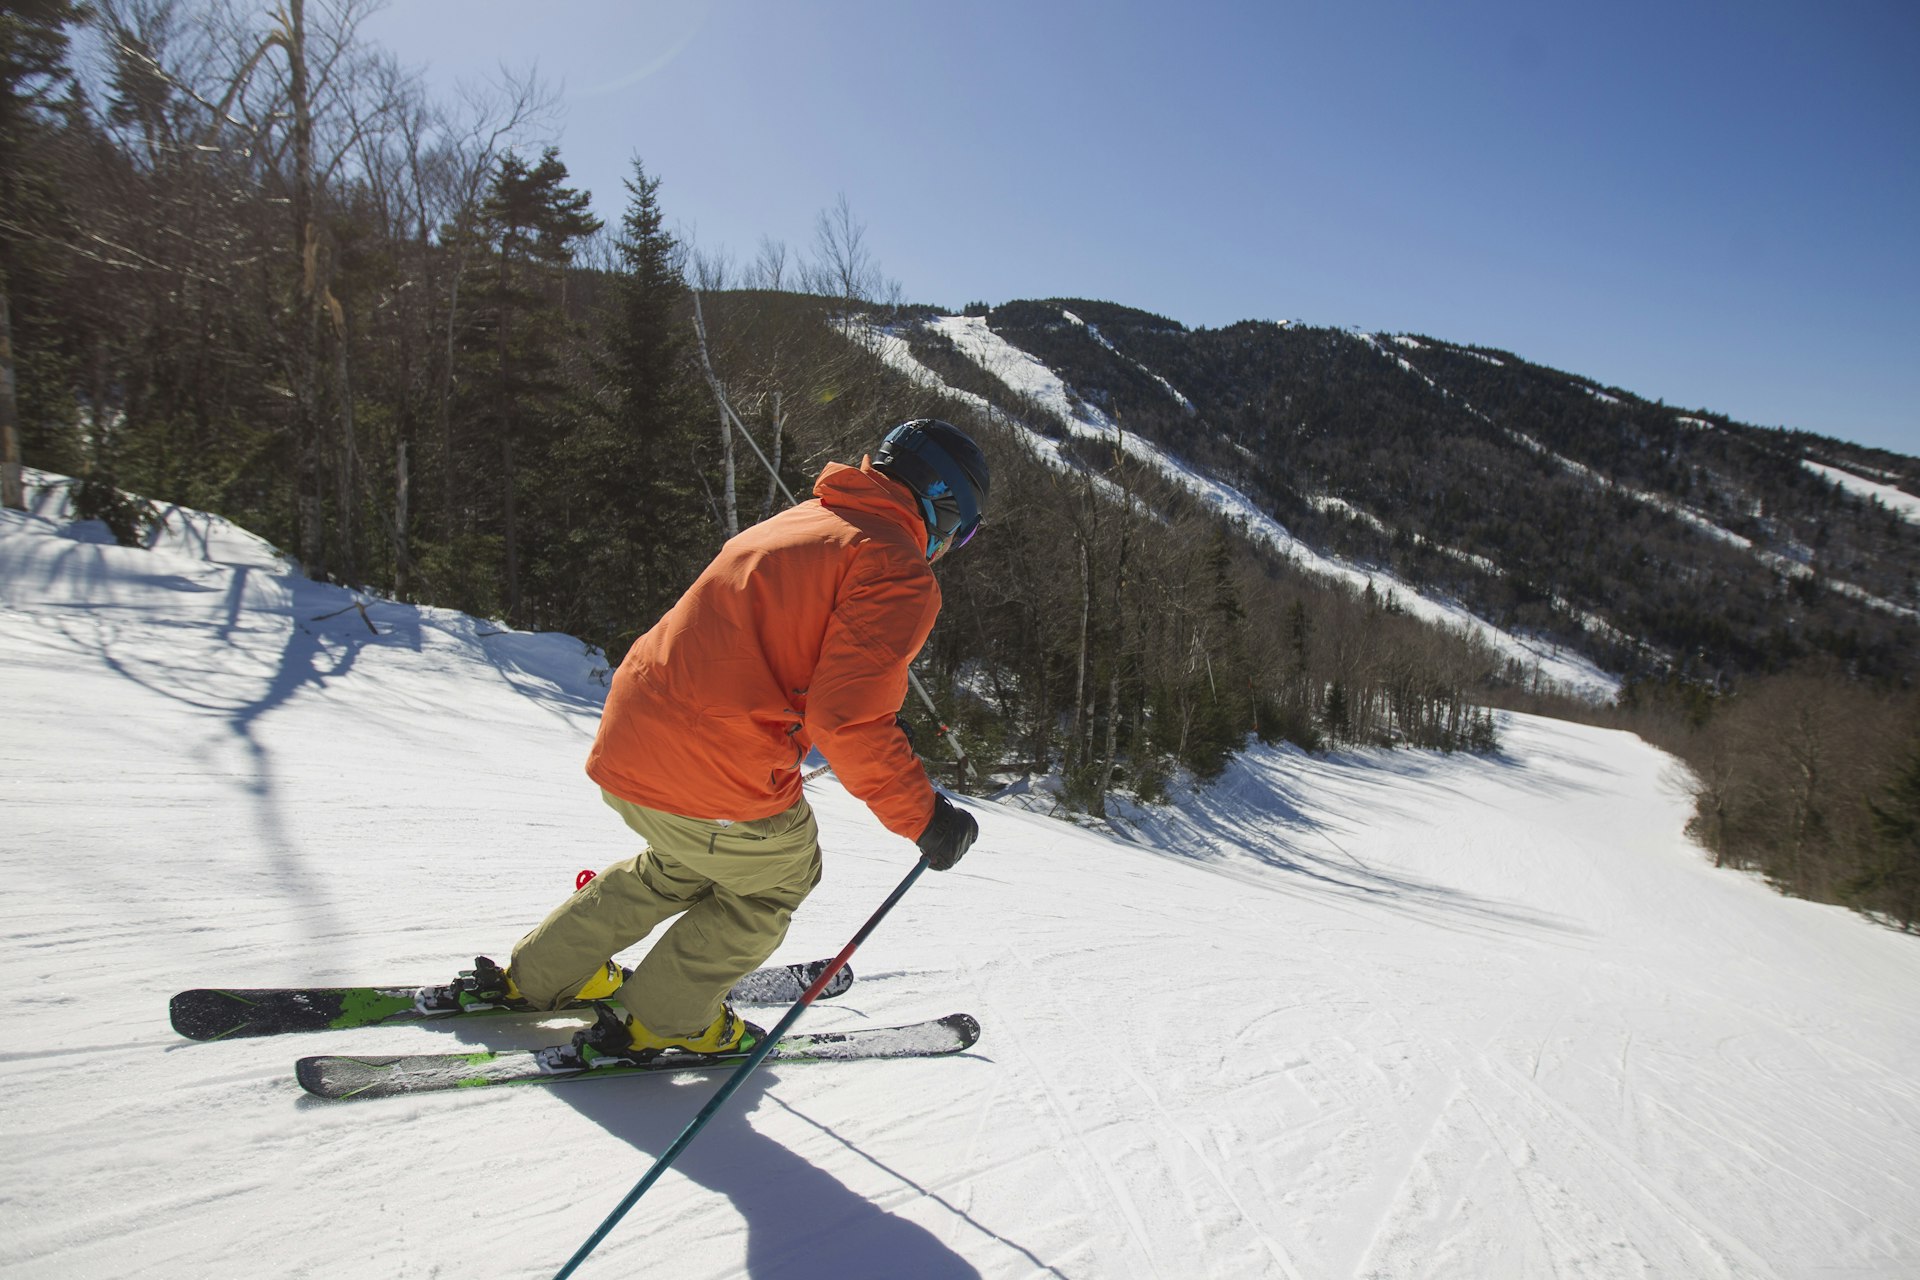 A skiier in a bright orange jacket heads down the snowy slopes